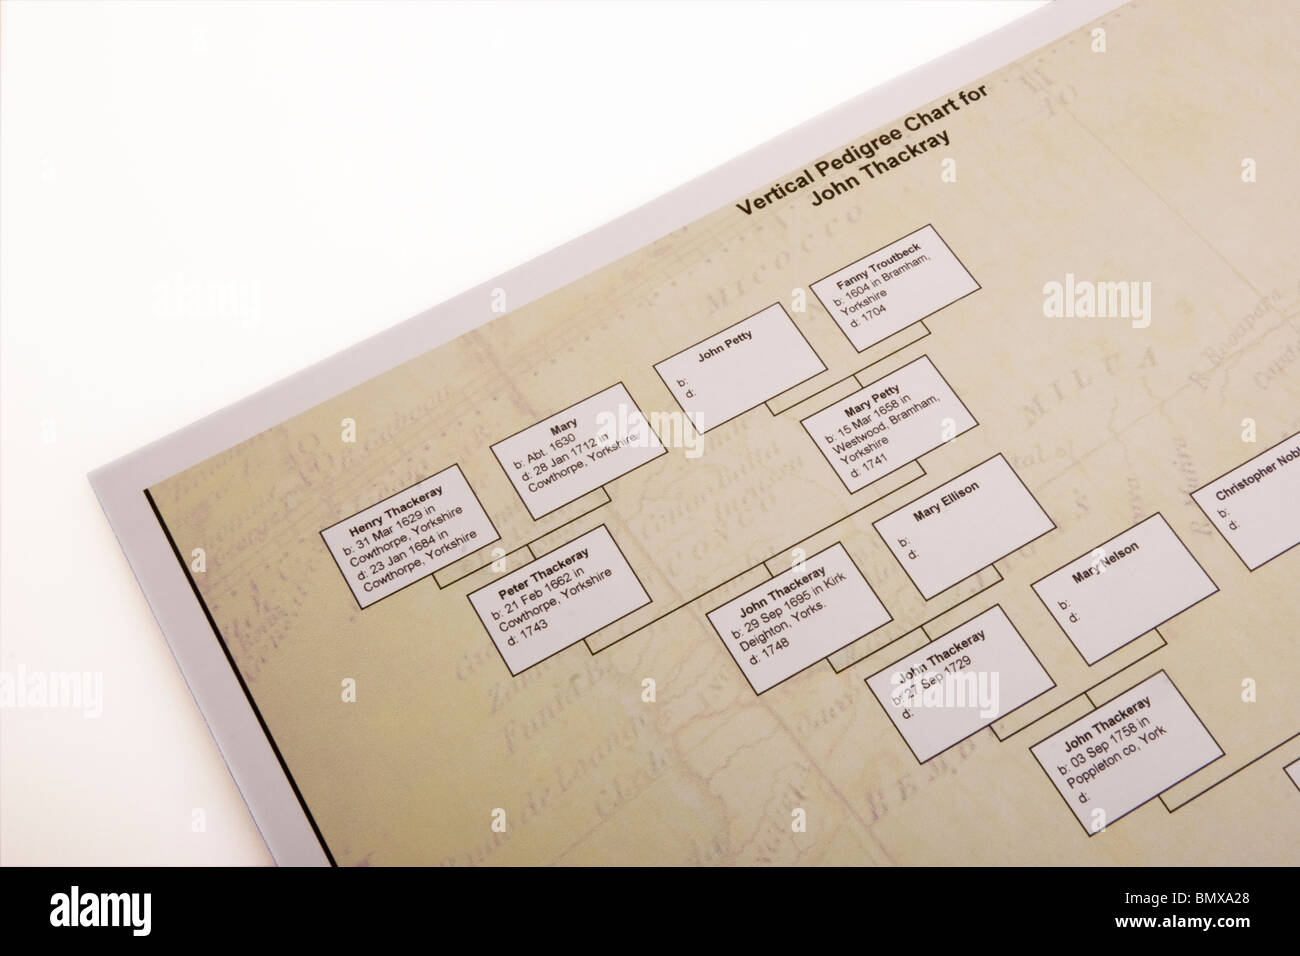 Printout of a family tree from genealogy software Stock Photo